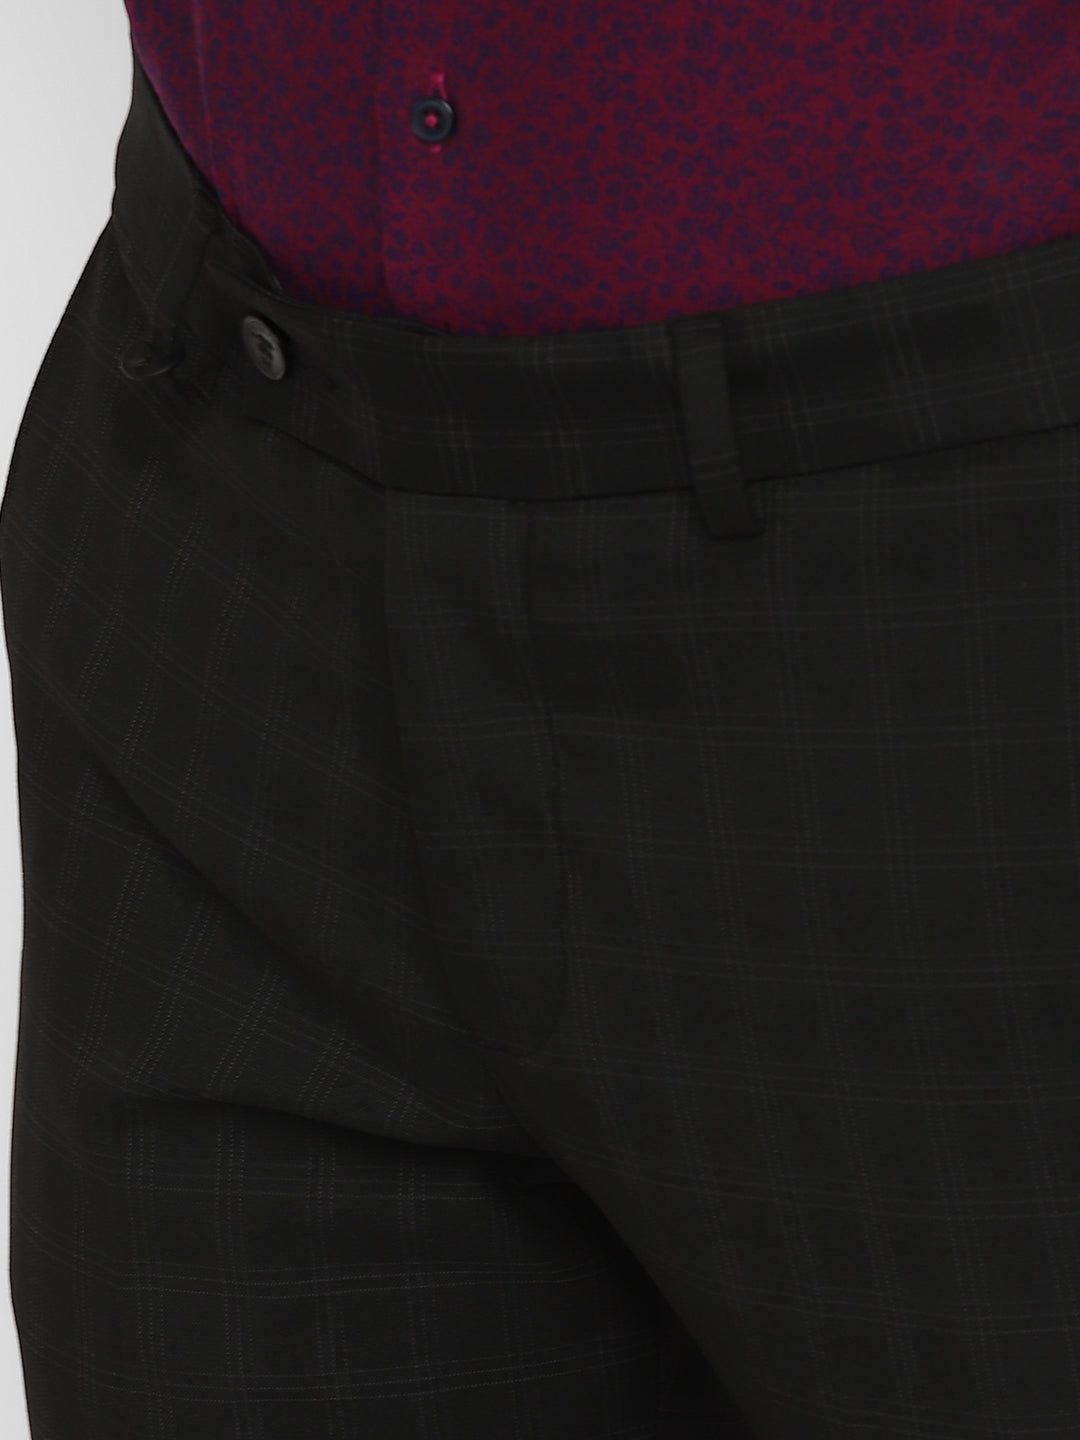 Grey Checked Ultra Slim Fit Trouser